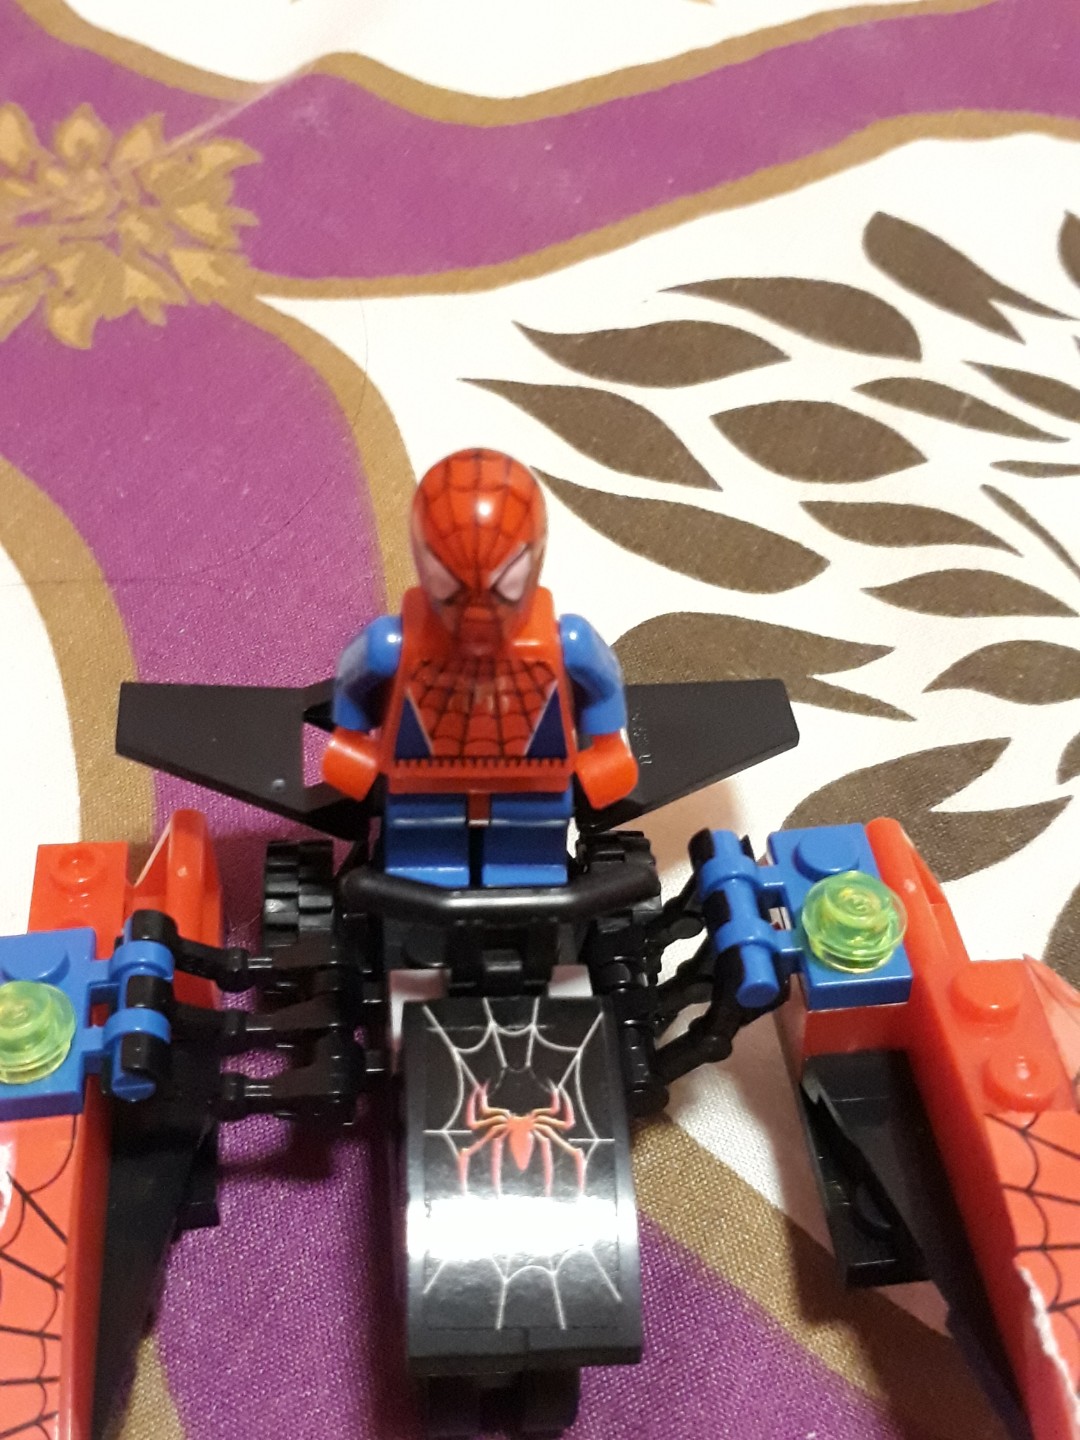 Lego Spiderman For A Roblox Acc That Has Robux Toys Games Bricks Figurines On Carousell - roblox premium robux prices in 2020 roblox minions character